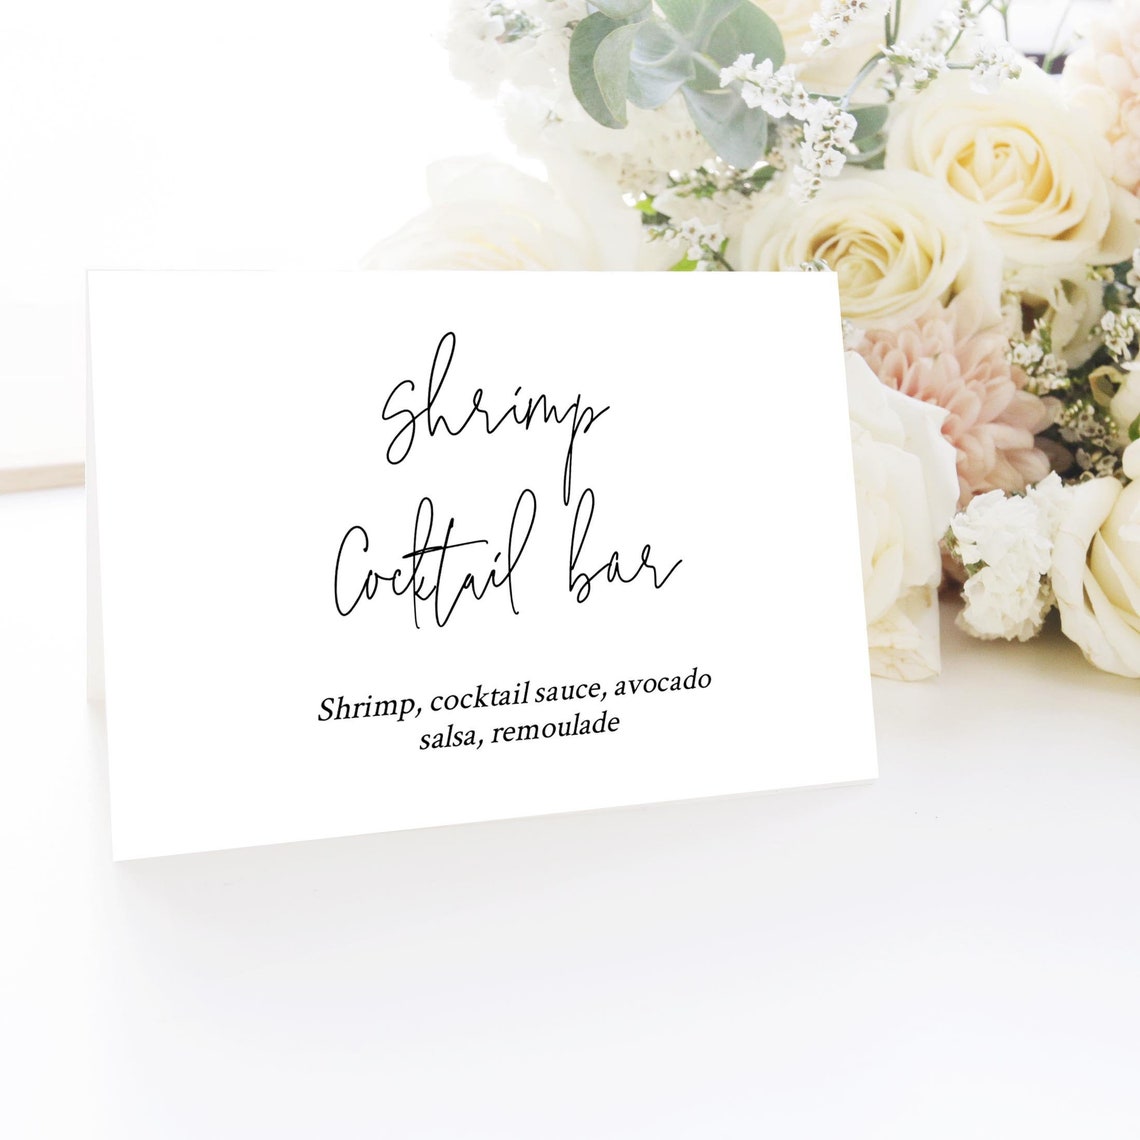 buffet-card-template-download-printable-food-label-editable-etsy